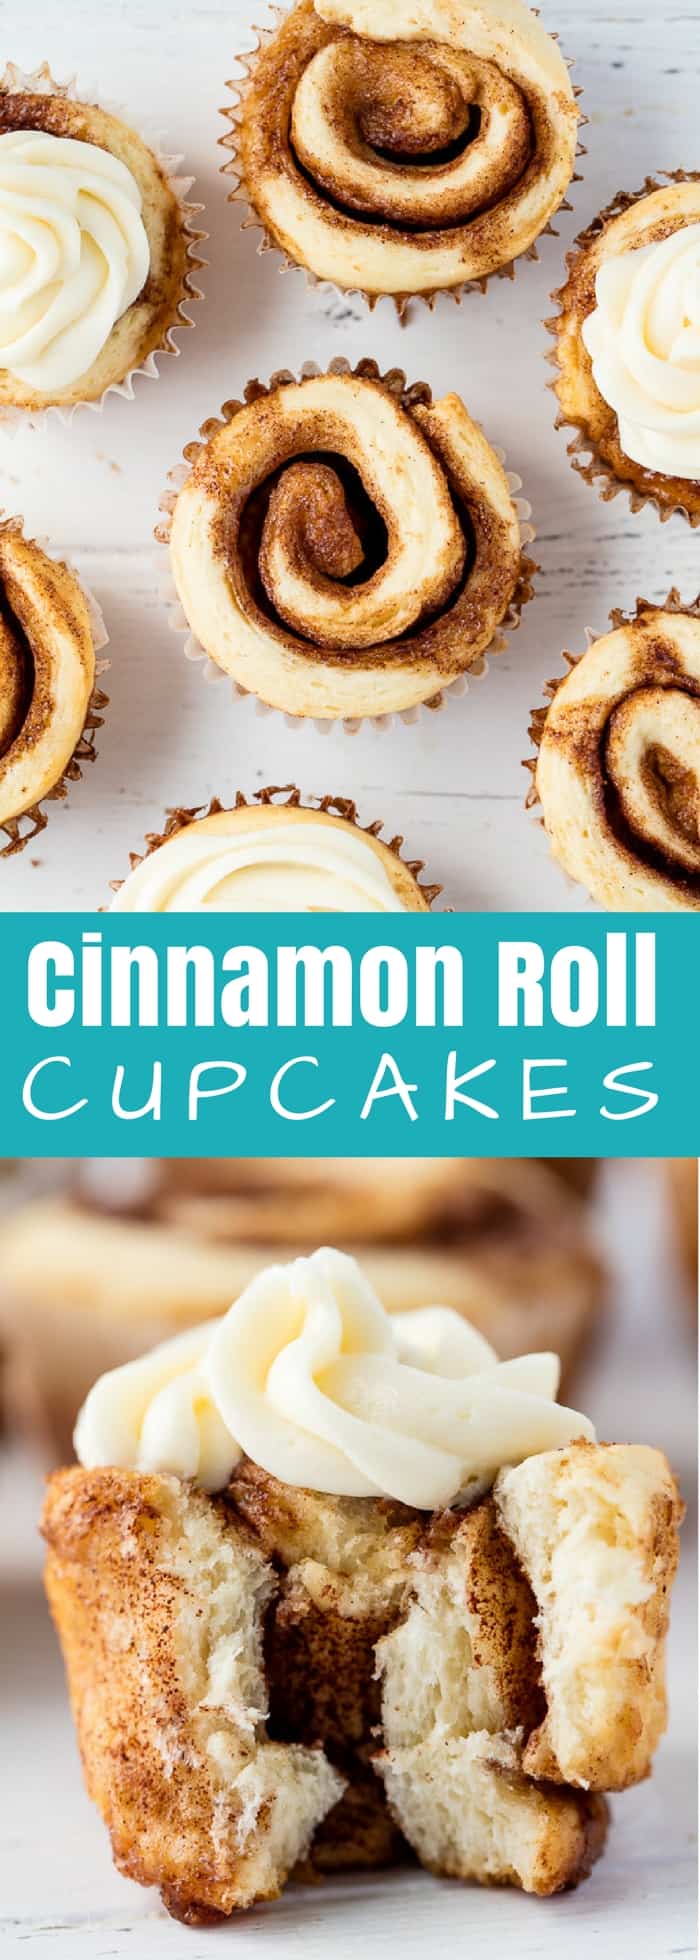 Cinnamon Roll Cupcakes are a fun new way to serve up single sized individual portions. These are just way too much fun!